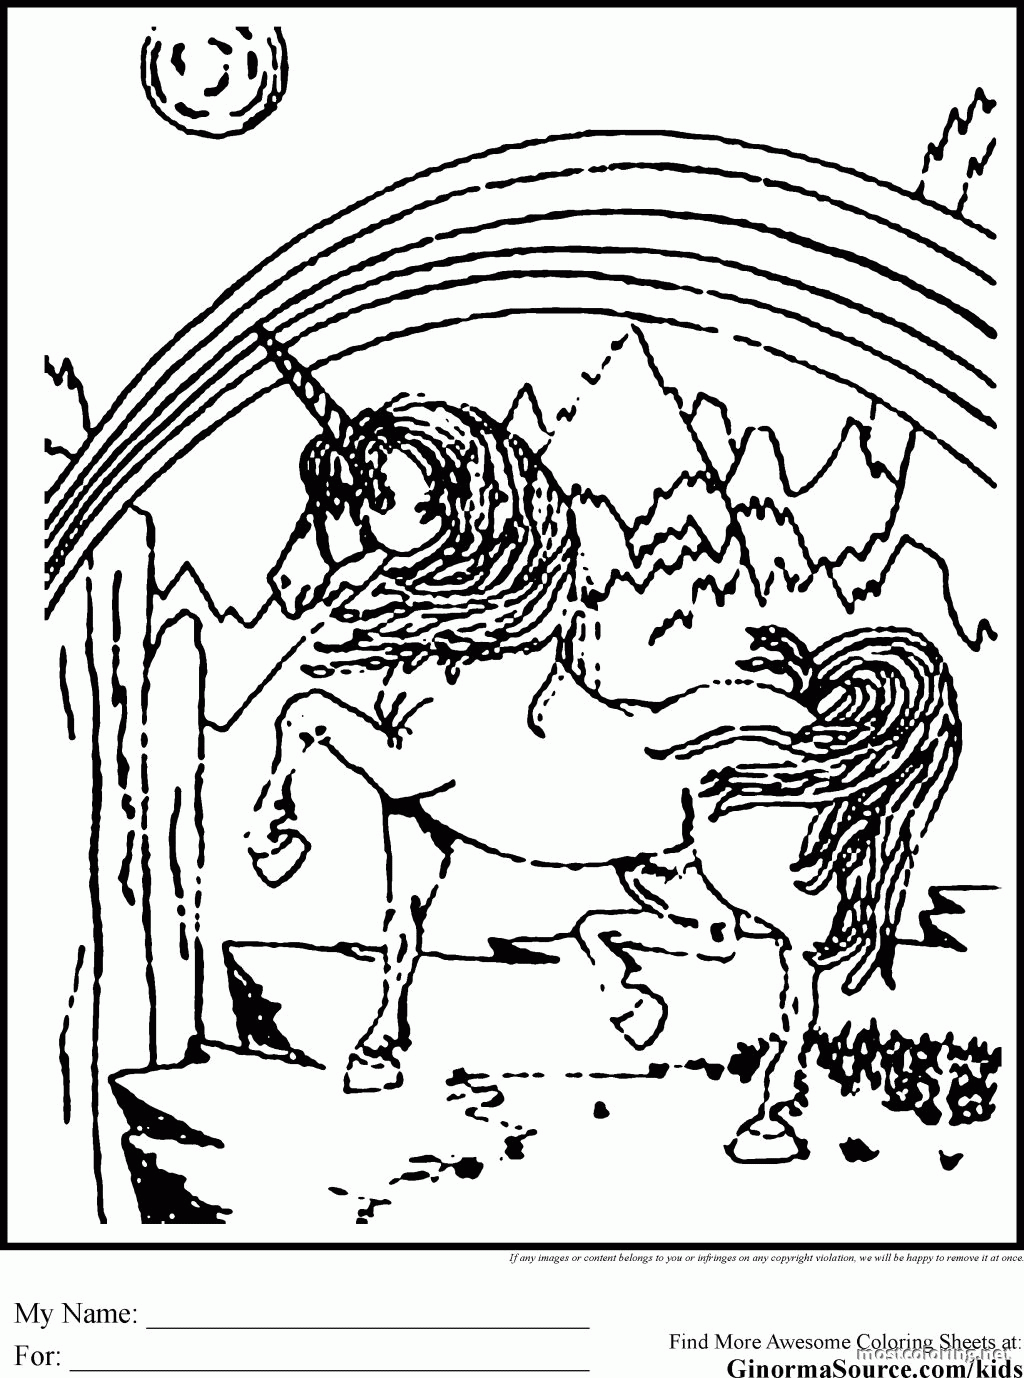 Unicorn Rainbow Coloring Pages Coloring Home